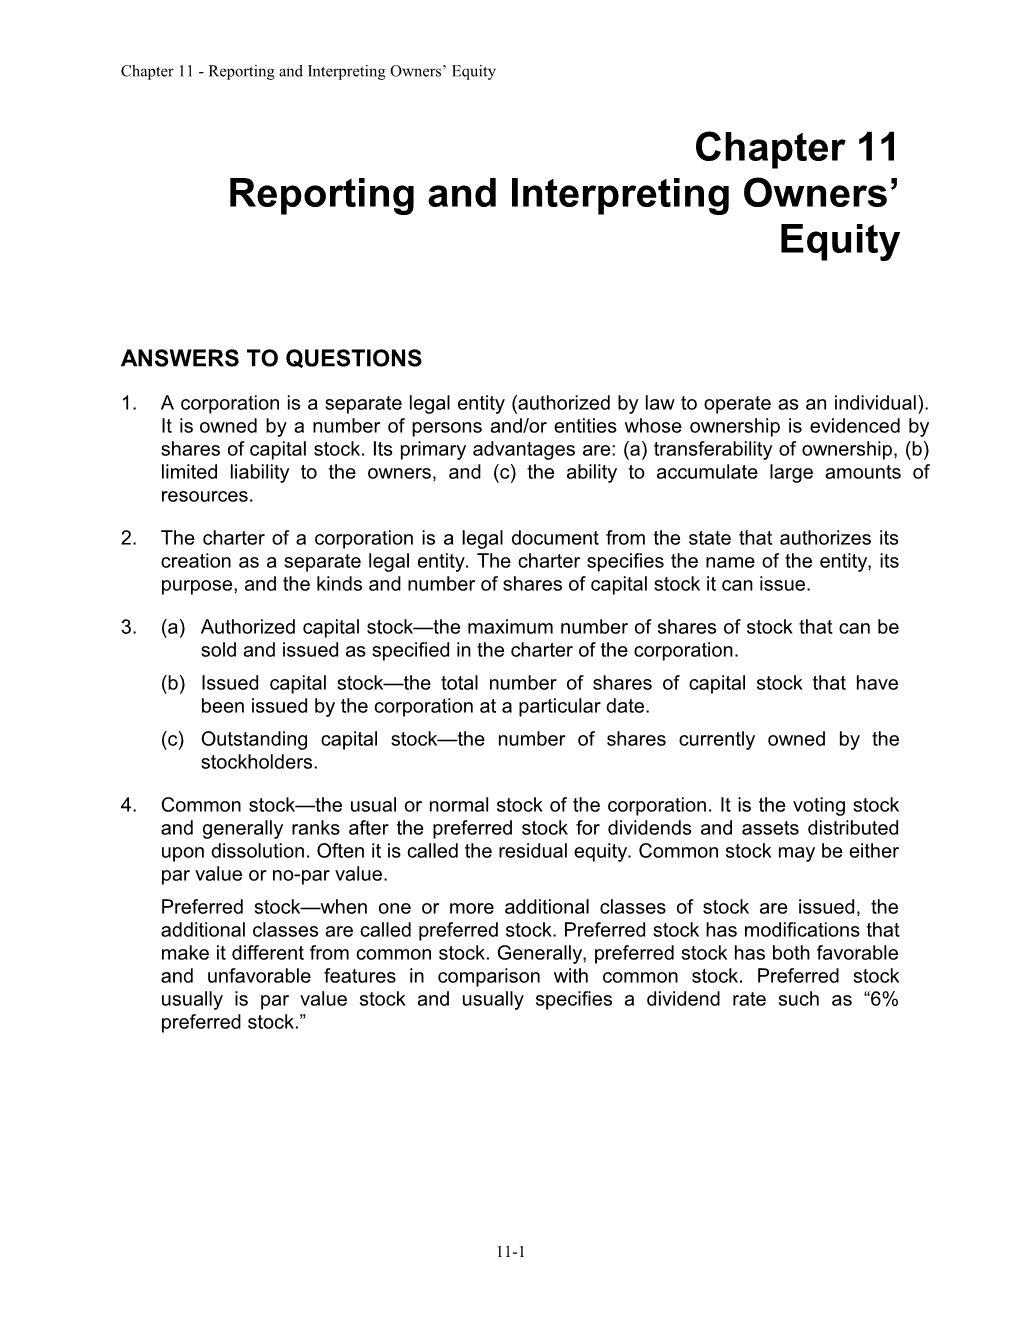 Reporting and Interpreting Owners Equity